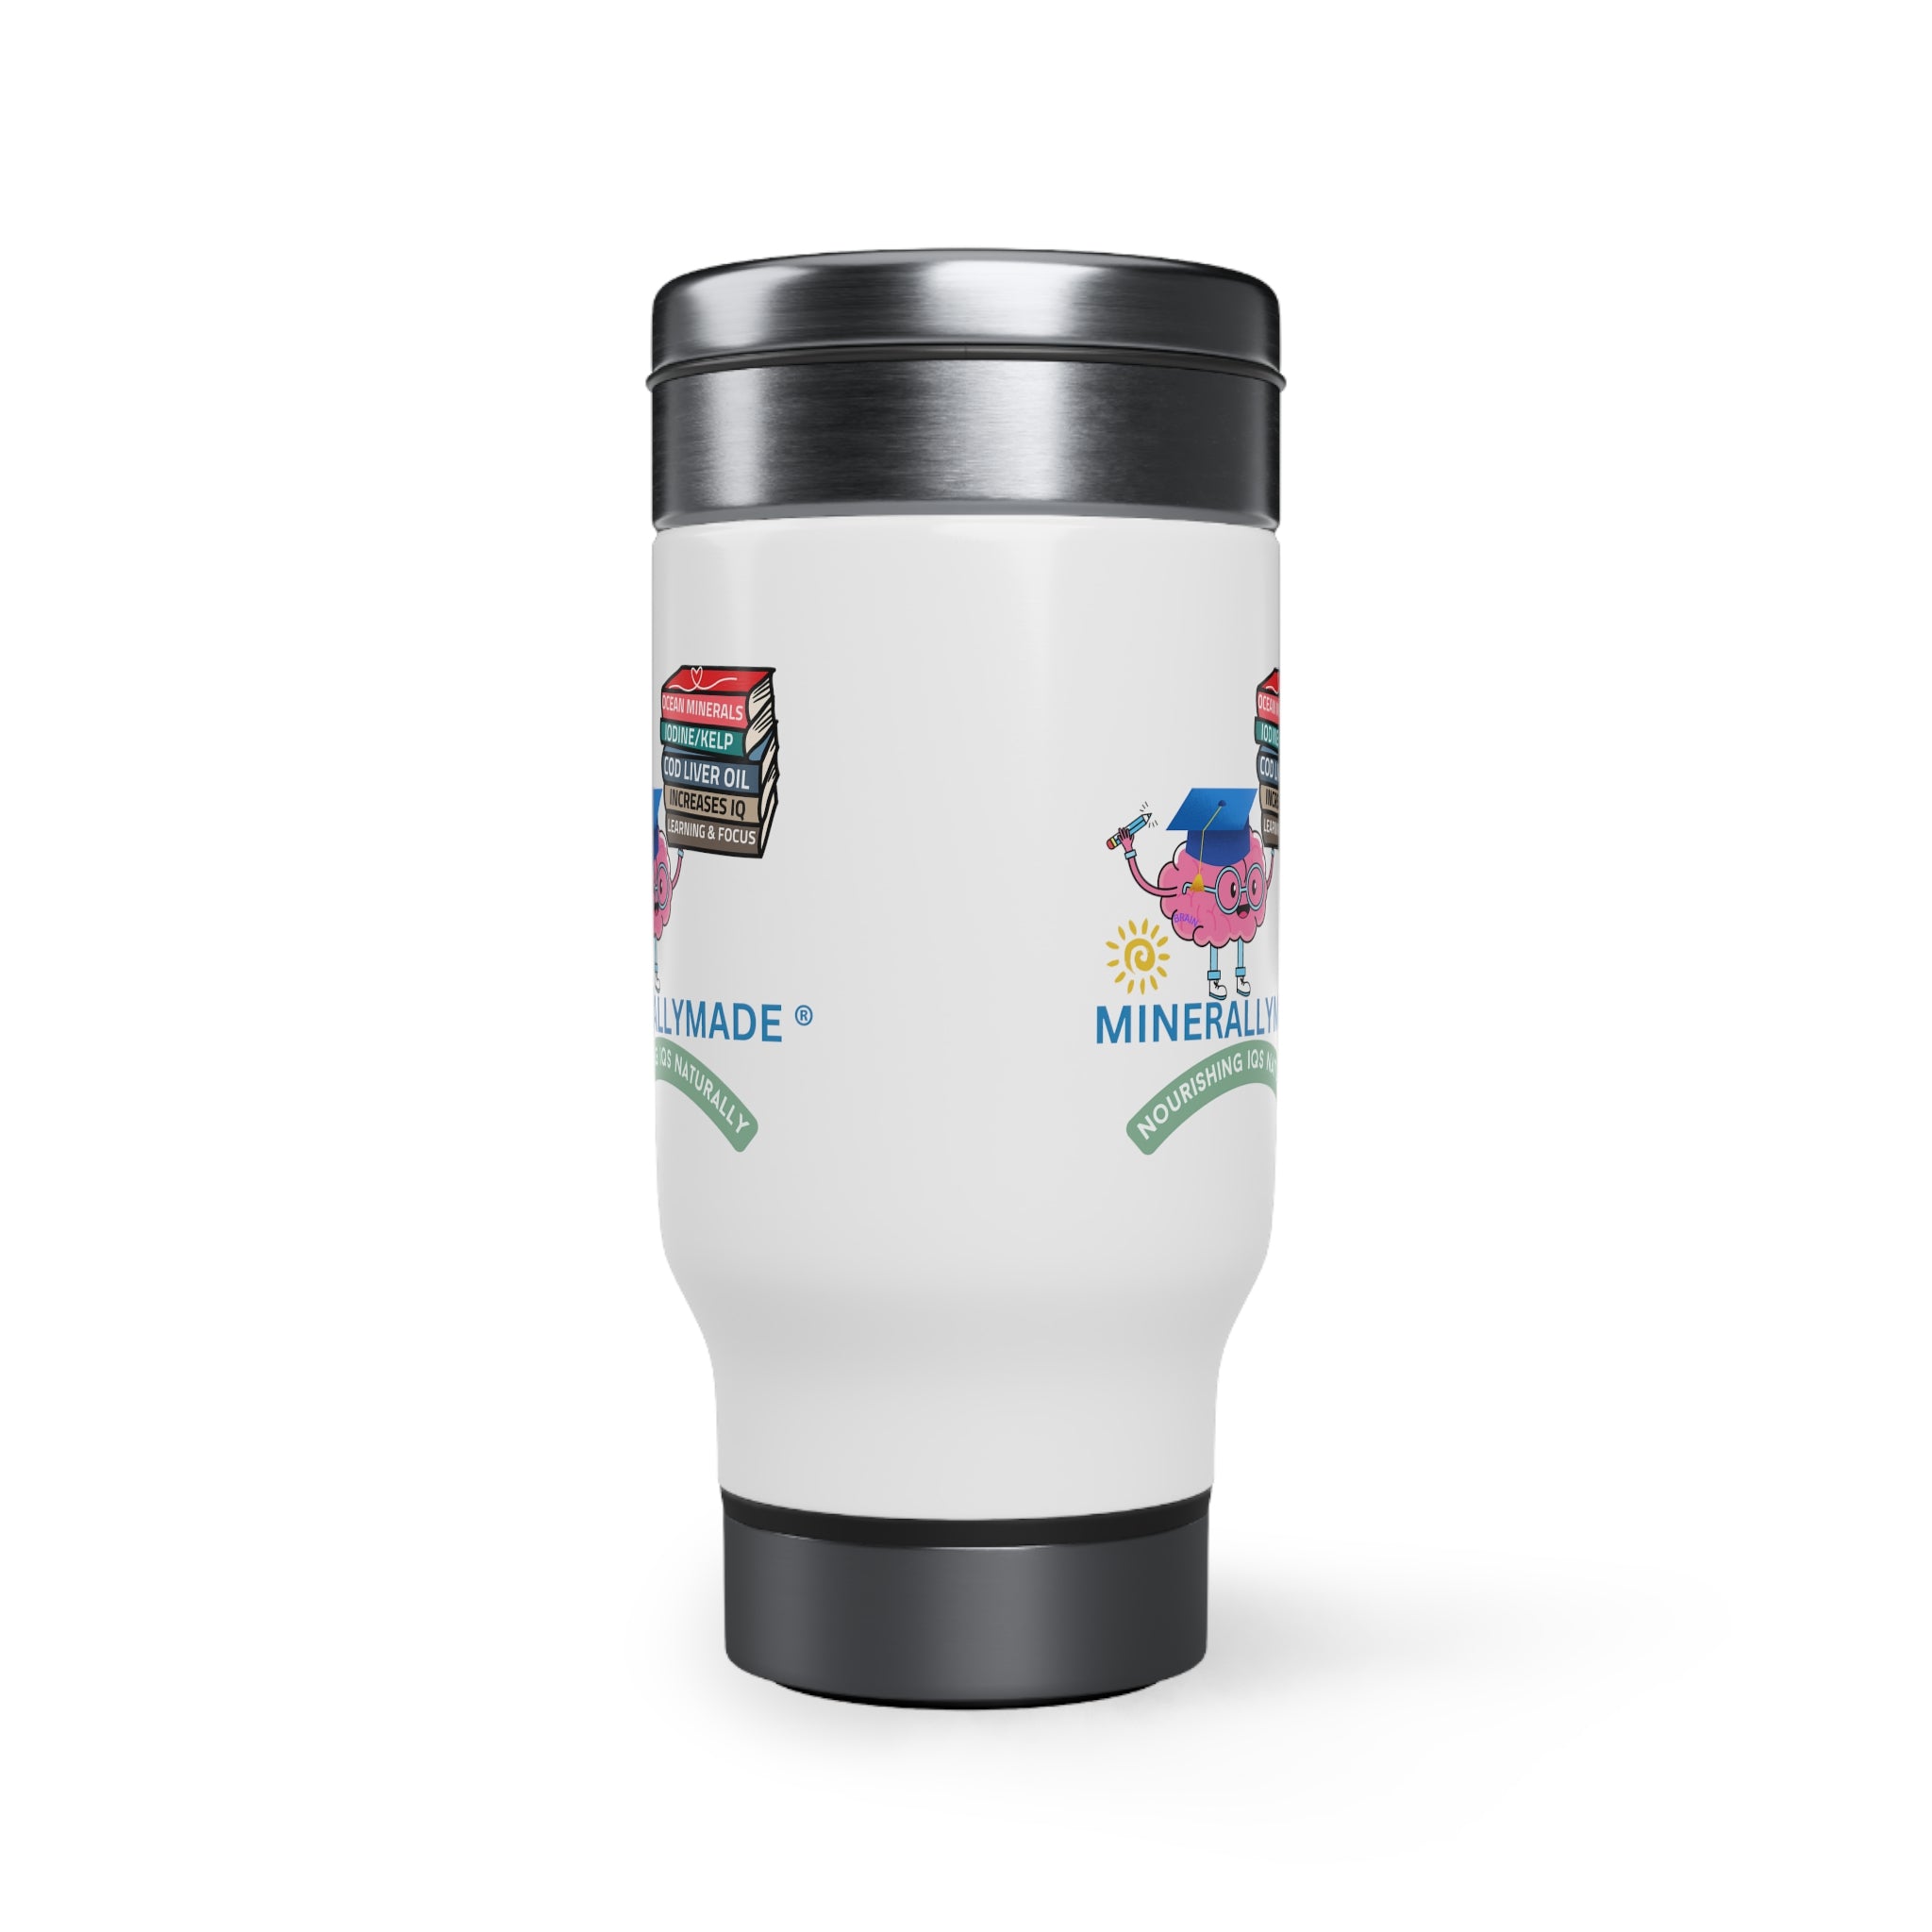 Minerallymade | Nourishing IQs Naturally | Stainless Steel Travel Mug with Handle, 14oz